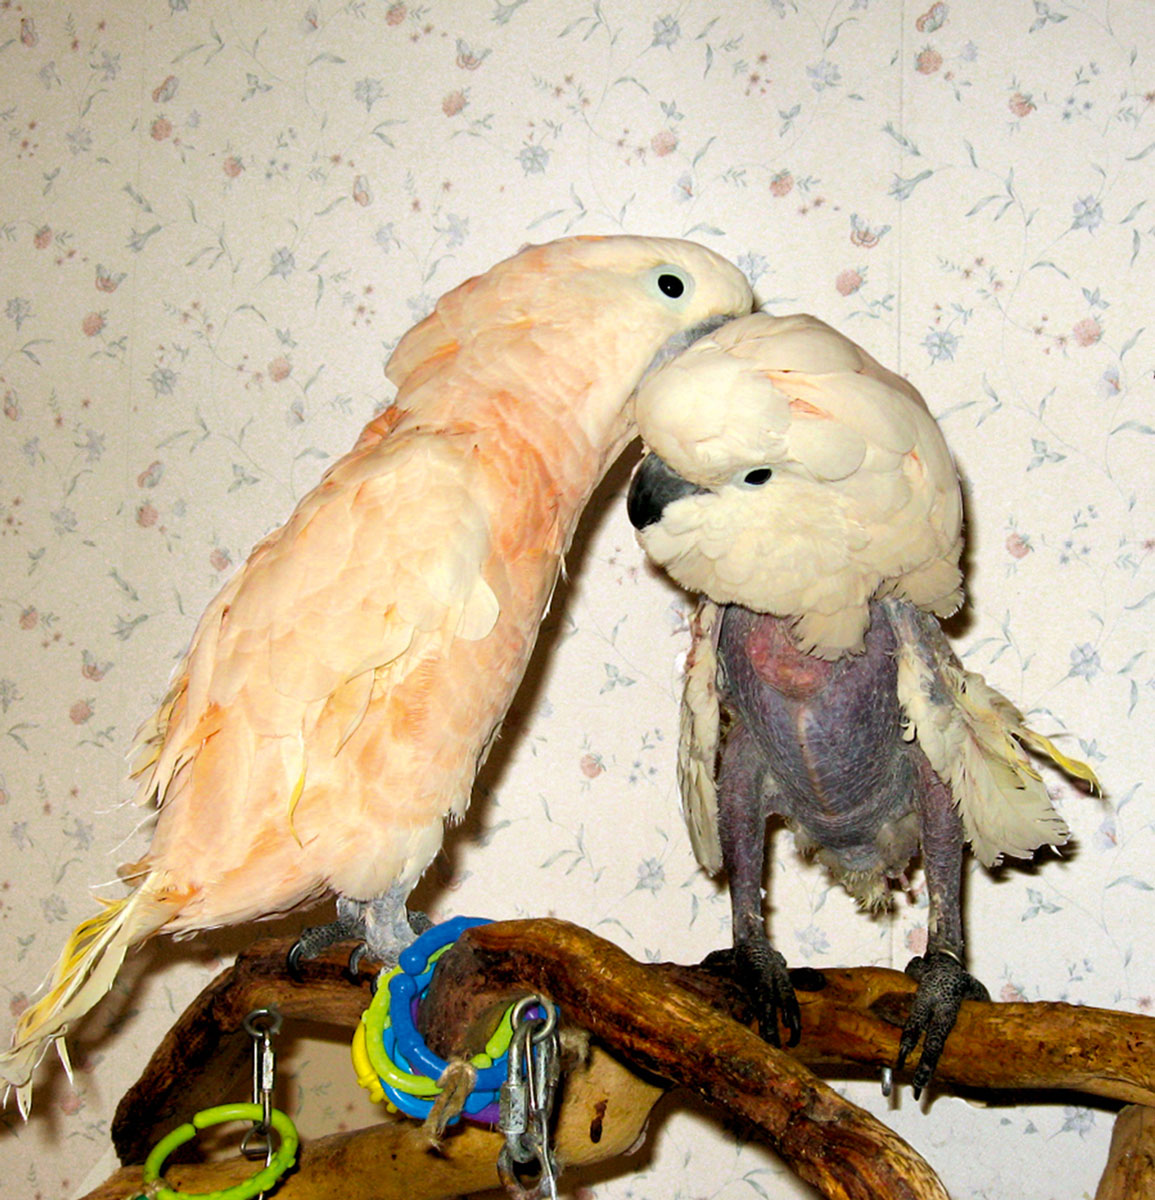 Chiquita (right) is a thirty-two-year-old female Moluccan cockatoo who arrived at Mollywood Avian Sanctuary in her present plucked condition in 2009. Eddie (left) is a nineteen-year-old male Moluccan cockatoo who has been chewing off his wing and tail feathers for ten years. He often preens Chiquita, though he does not pluck her; Chiquita, however, occasionally plucks some of Eddie’s feathers. Courtesy Mollywood Avian Sanctuary.